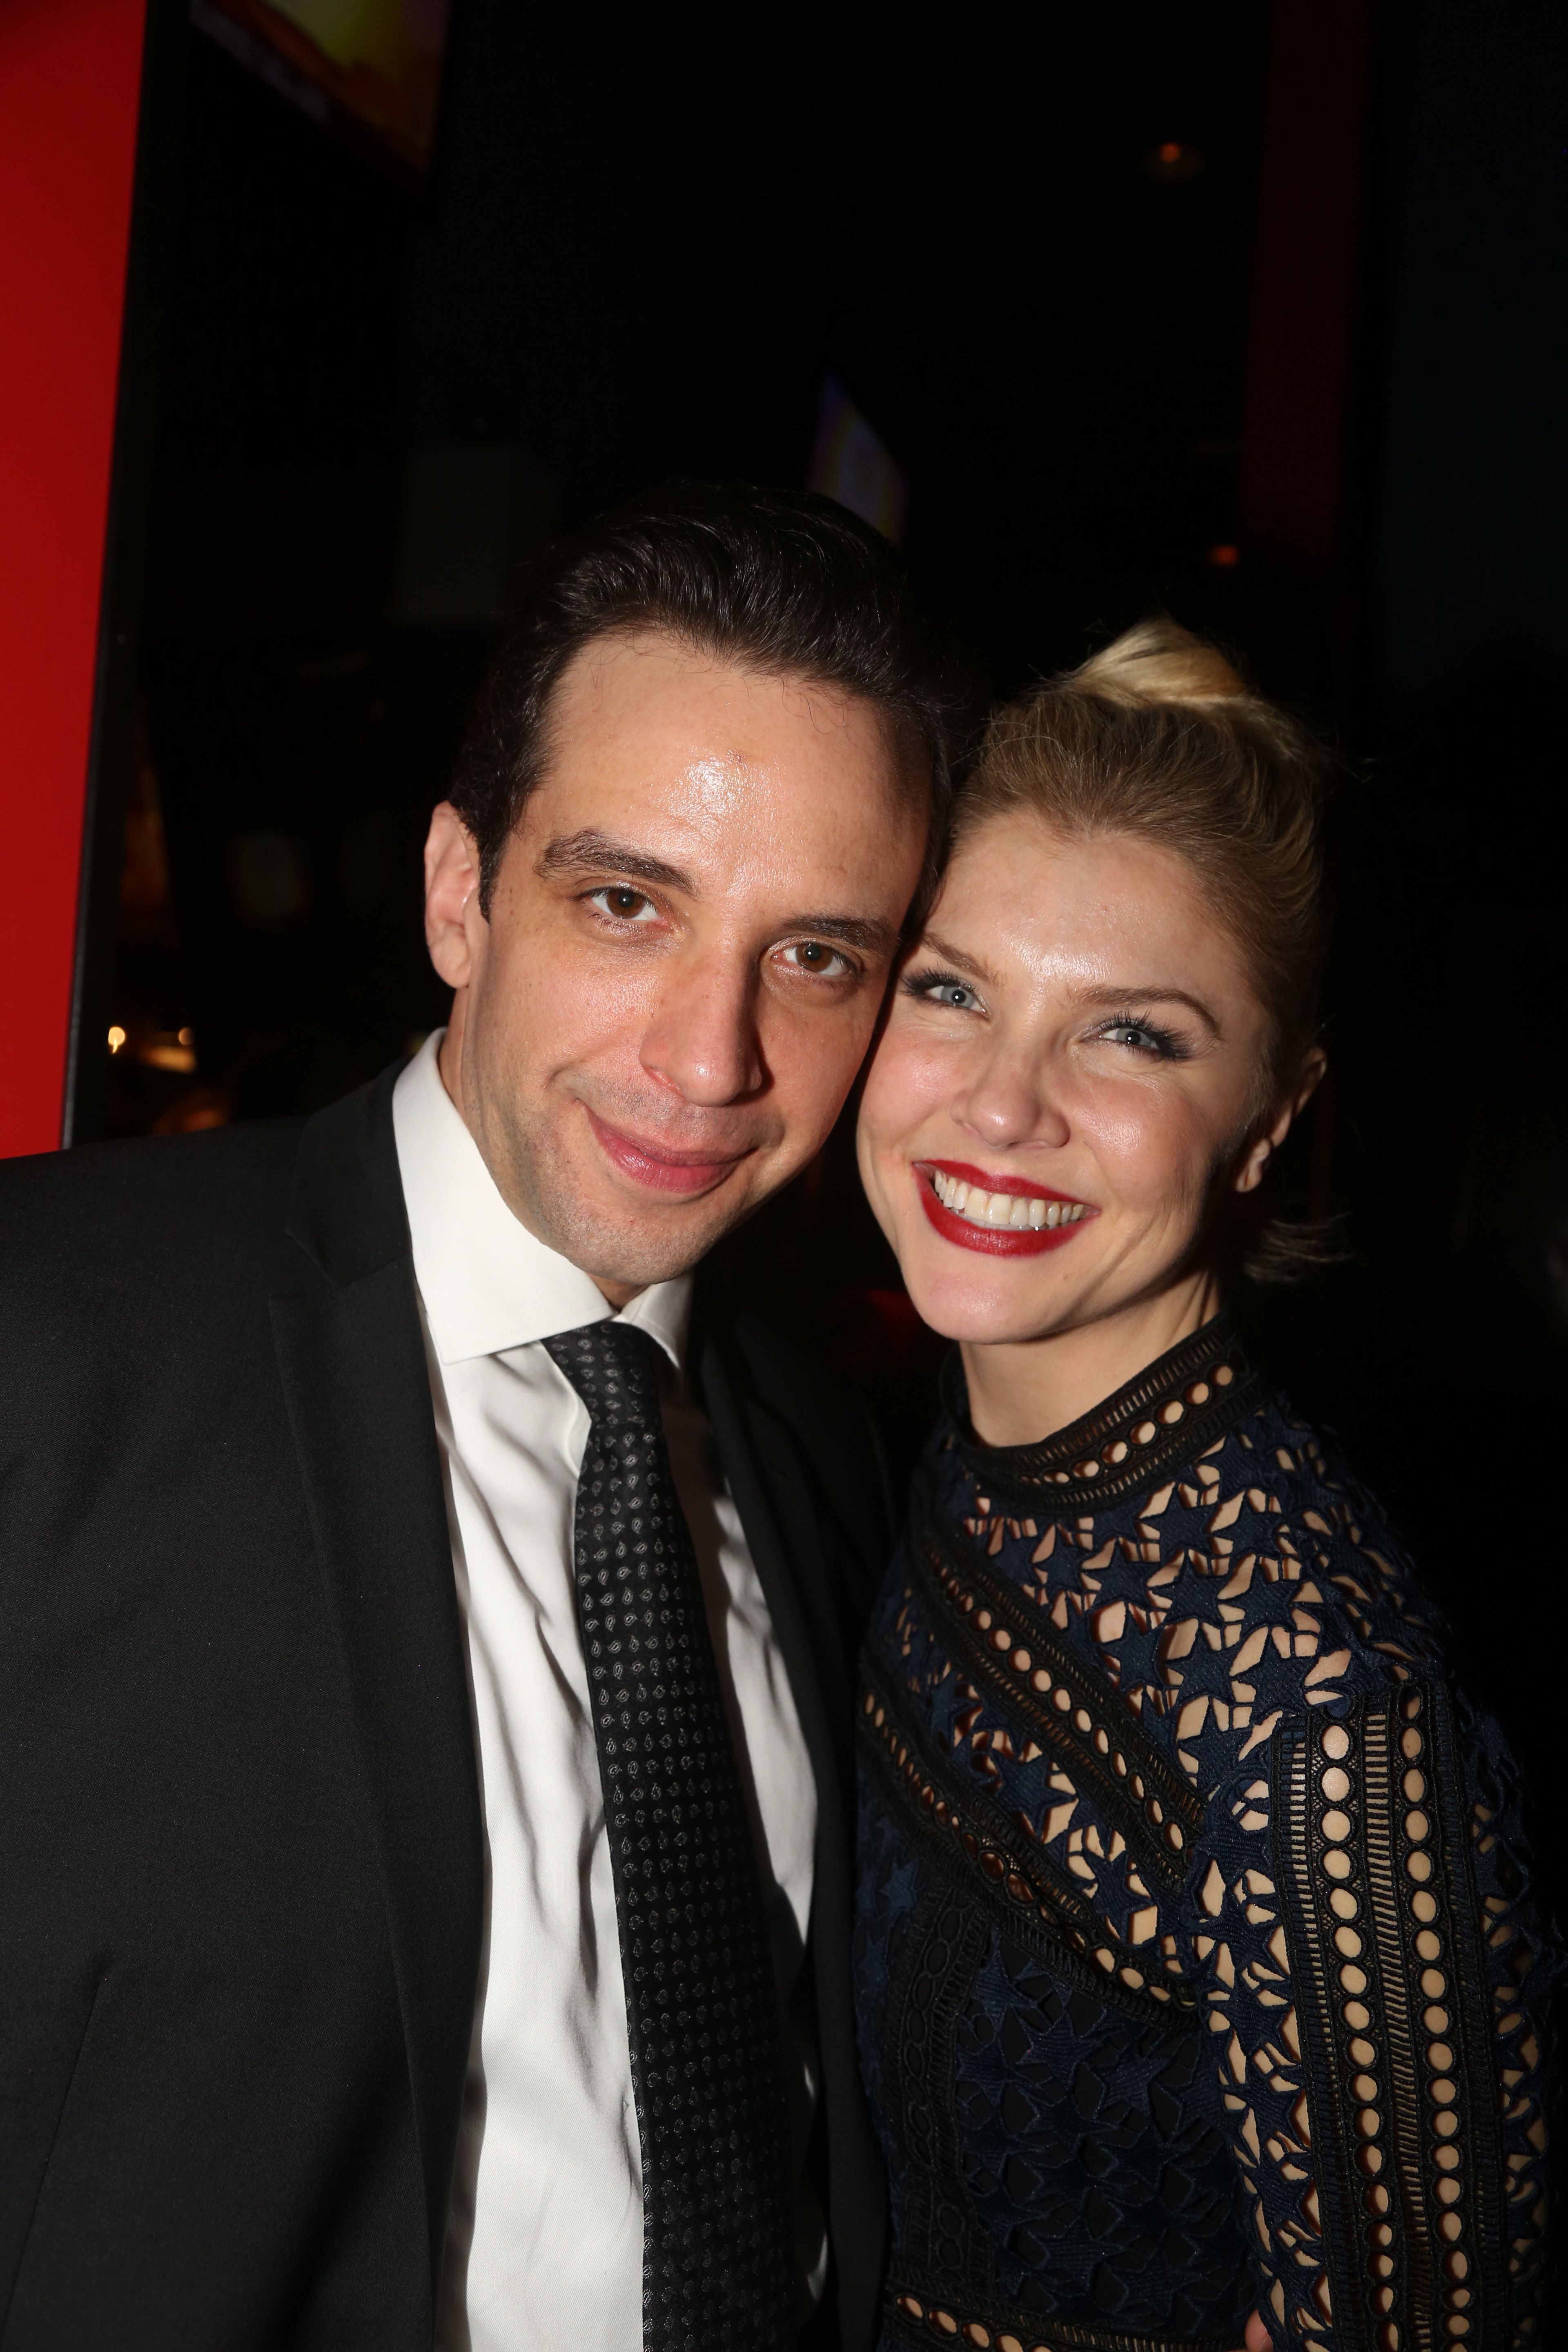 Nick Cordero and Amanda Kloots pose at the after party for Manhattan Concert Production's Broadway Series on February 19, 2017 in New York City | Photo: Getty Images  